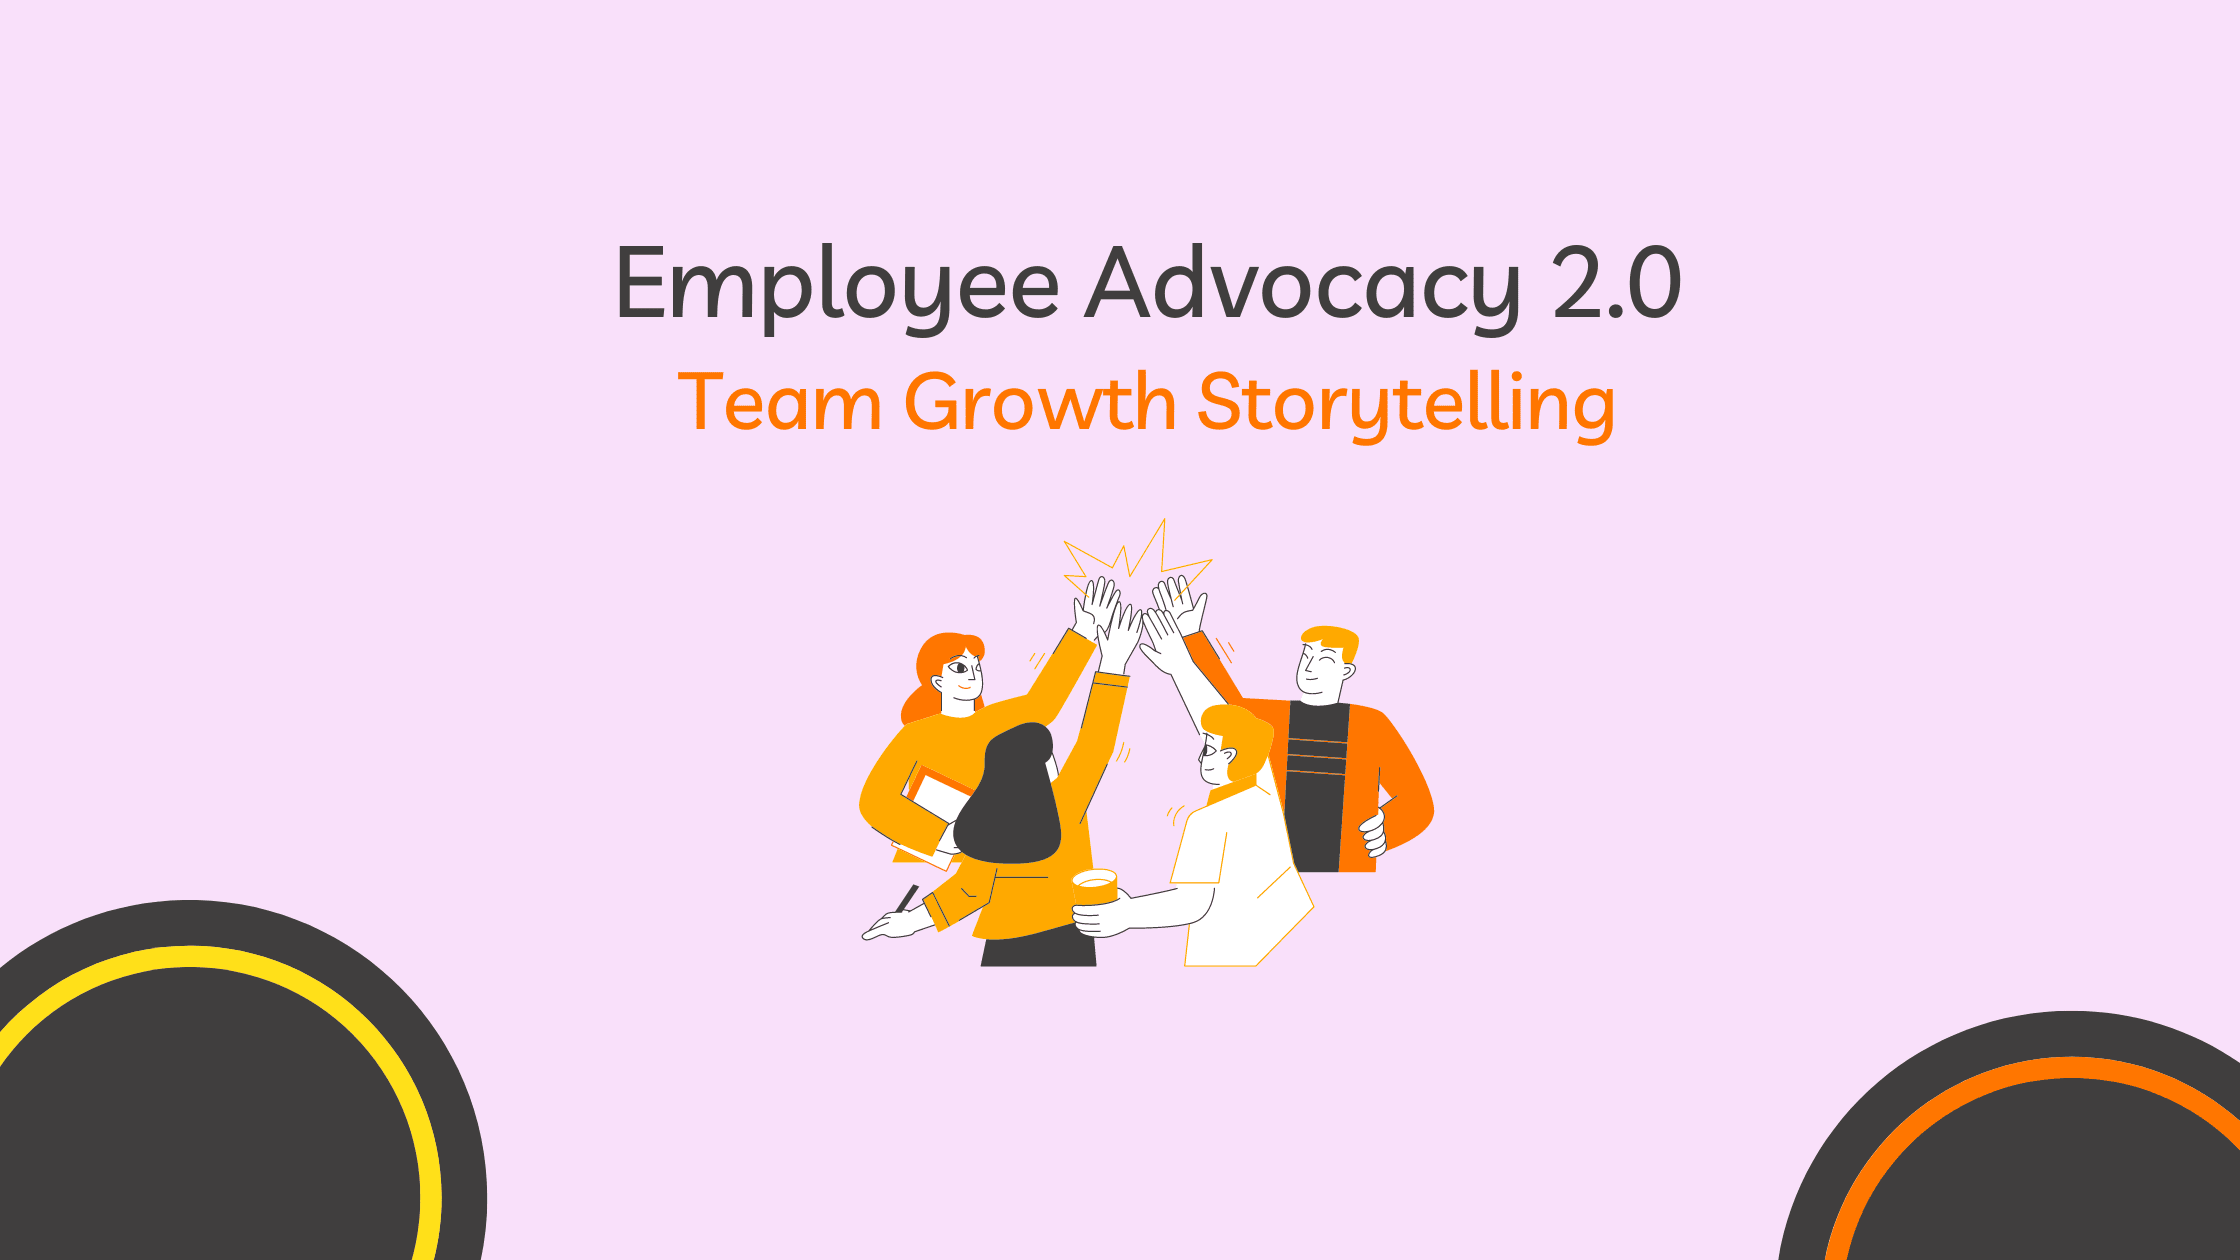 Your Company on Employee Advocacy 2.0